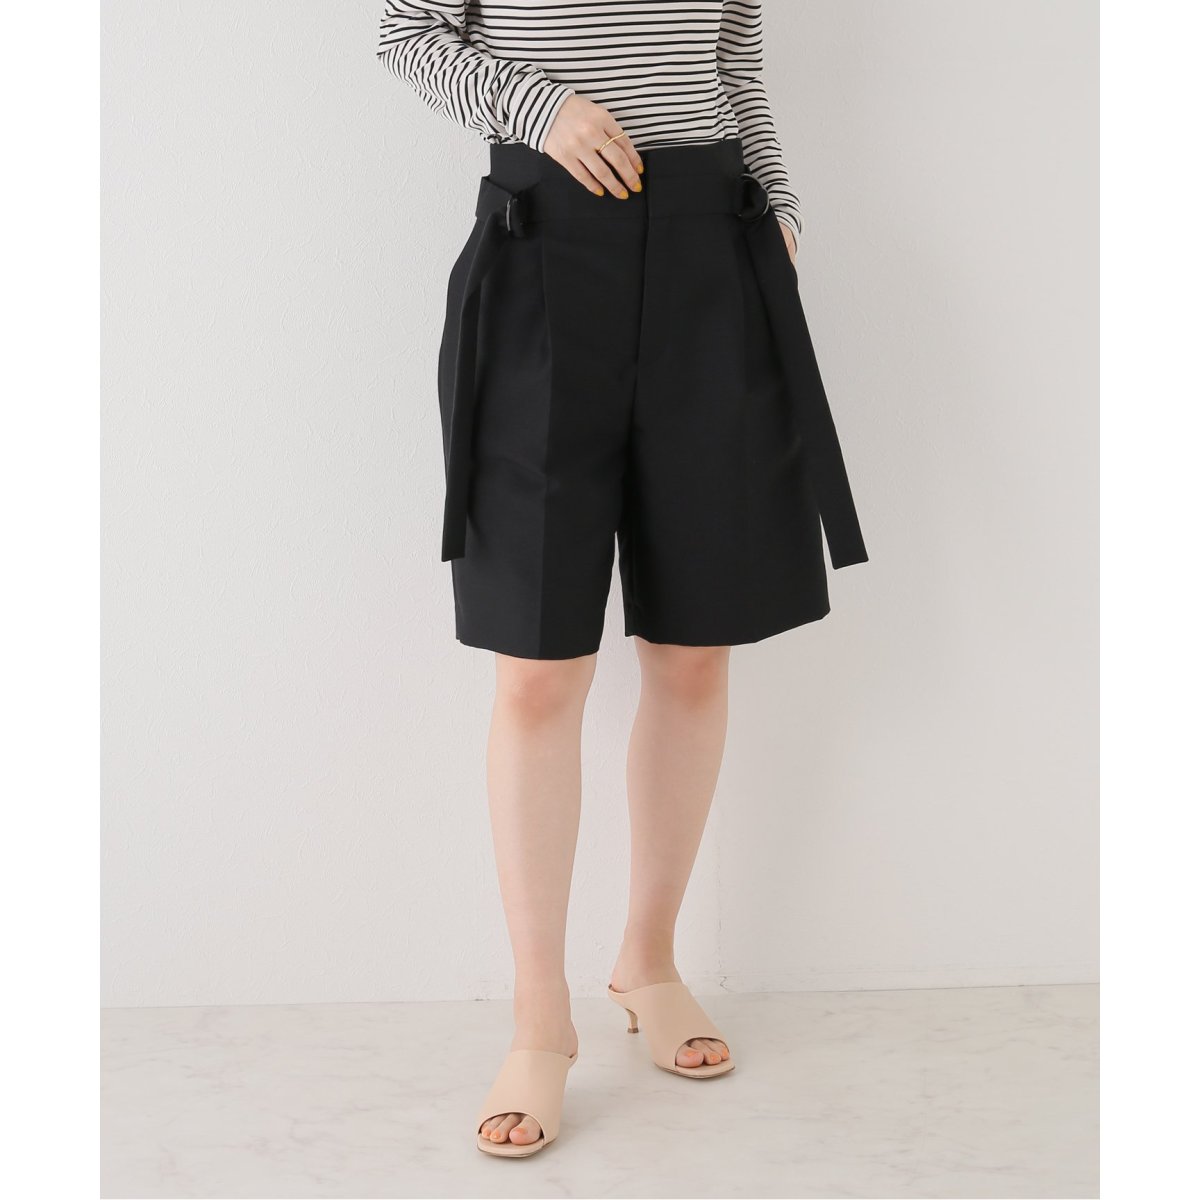 STUMBLY】Belted Bermuda Pants | ノーブル(Noble) | 23032250000110